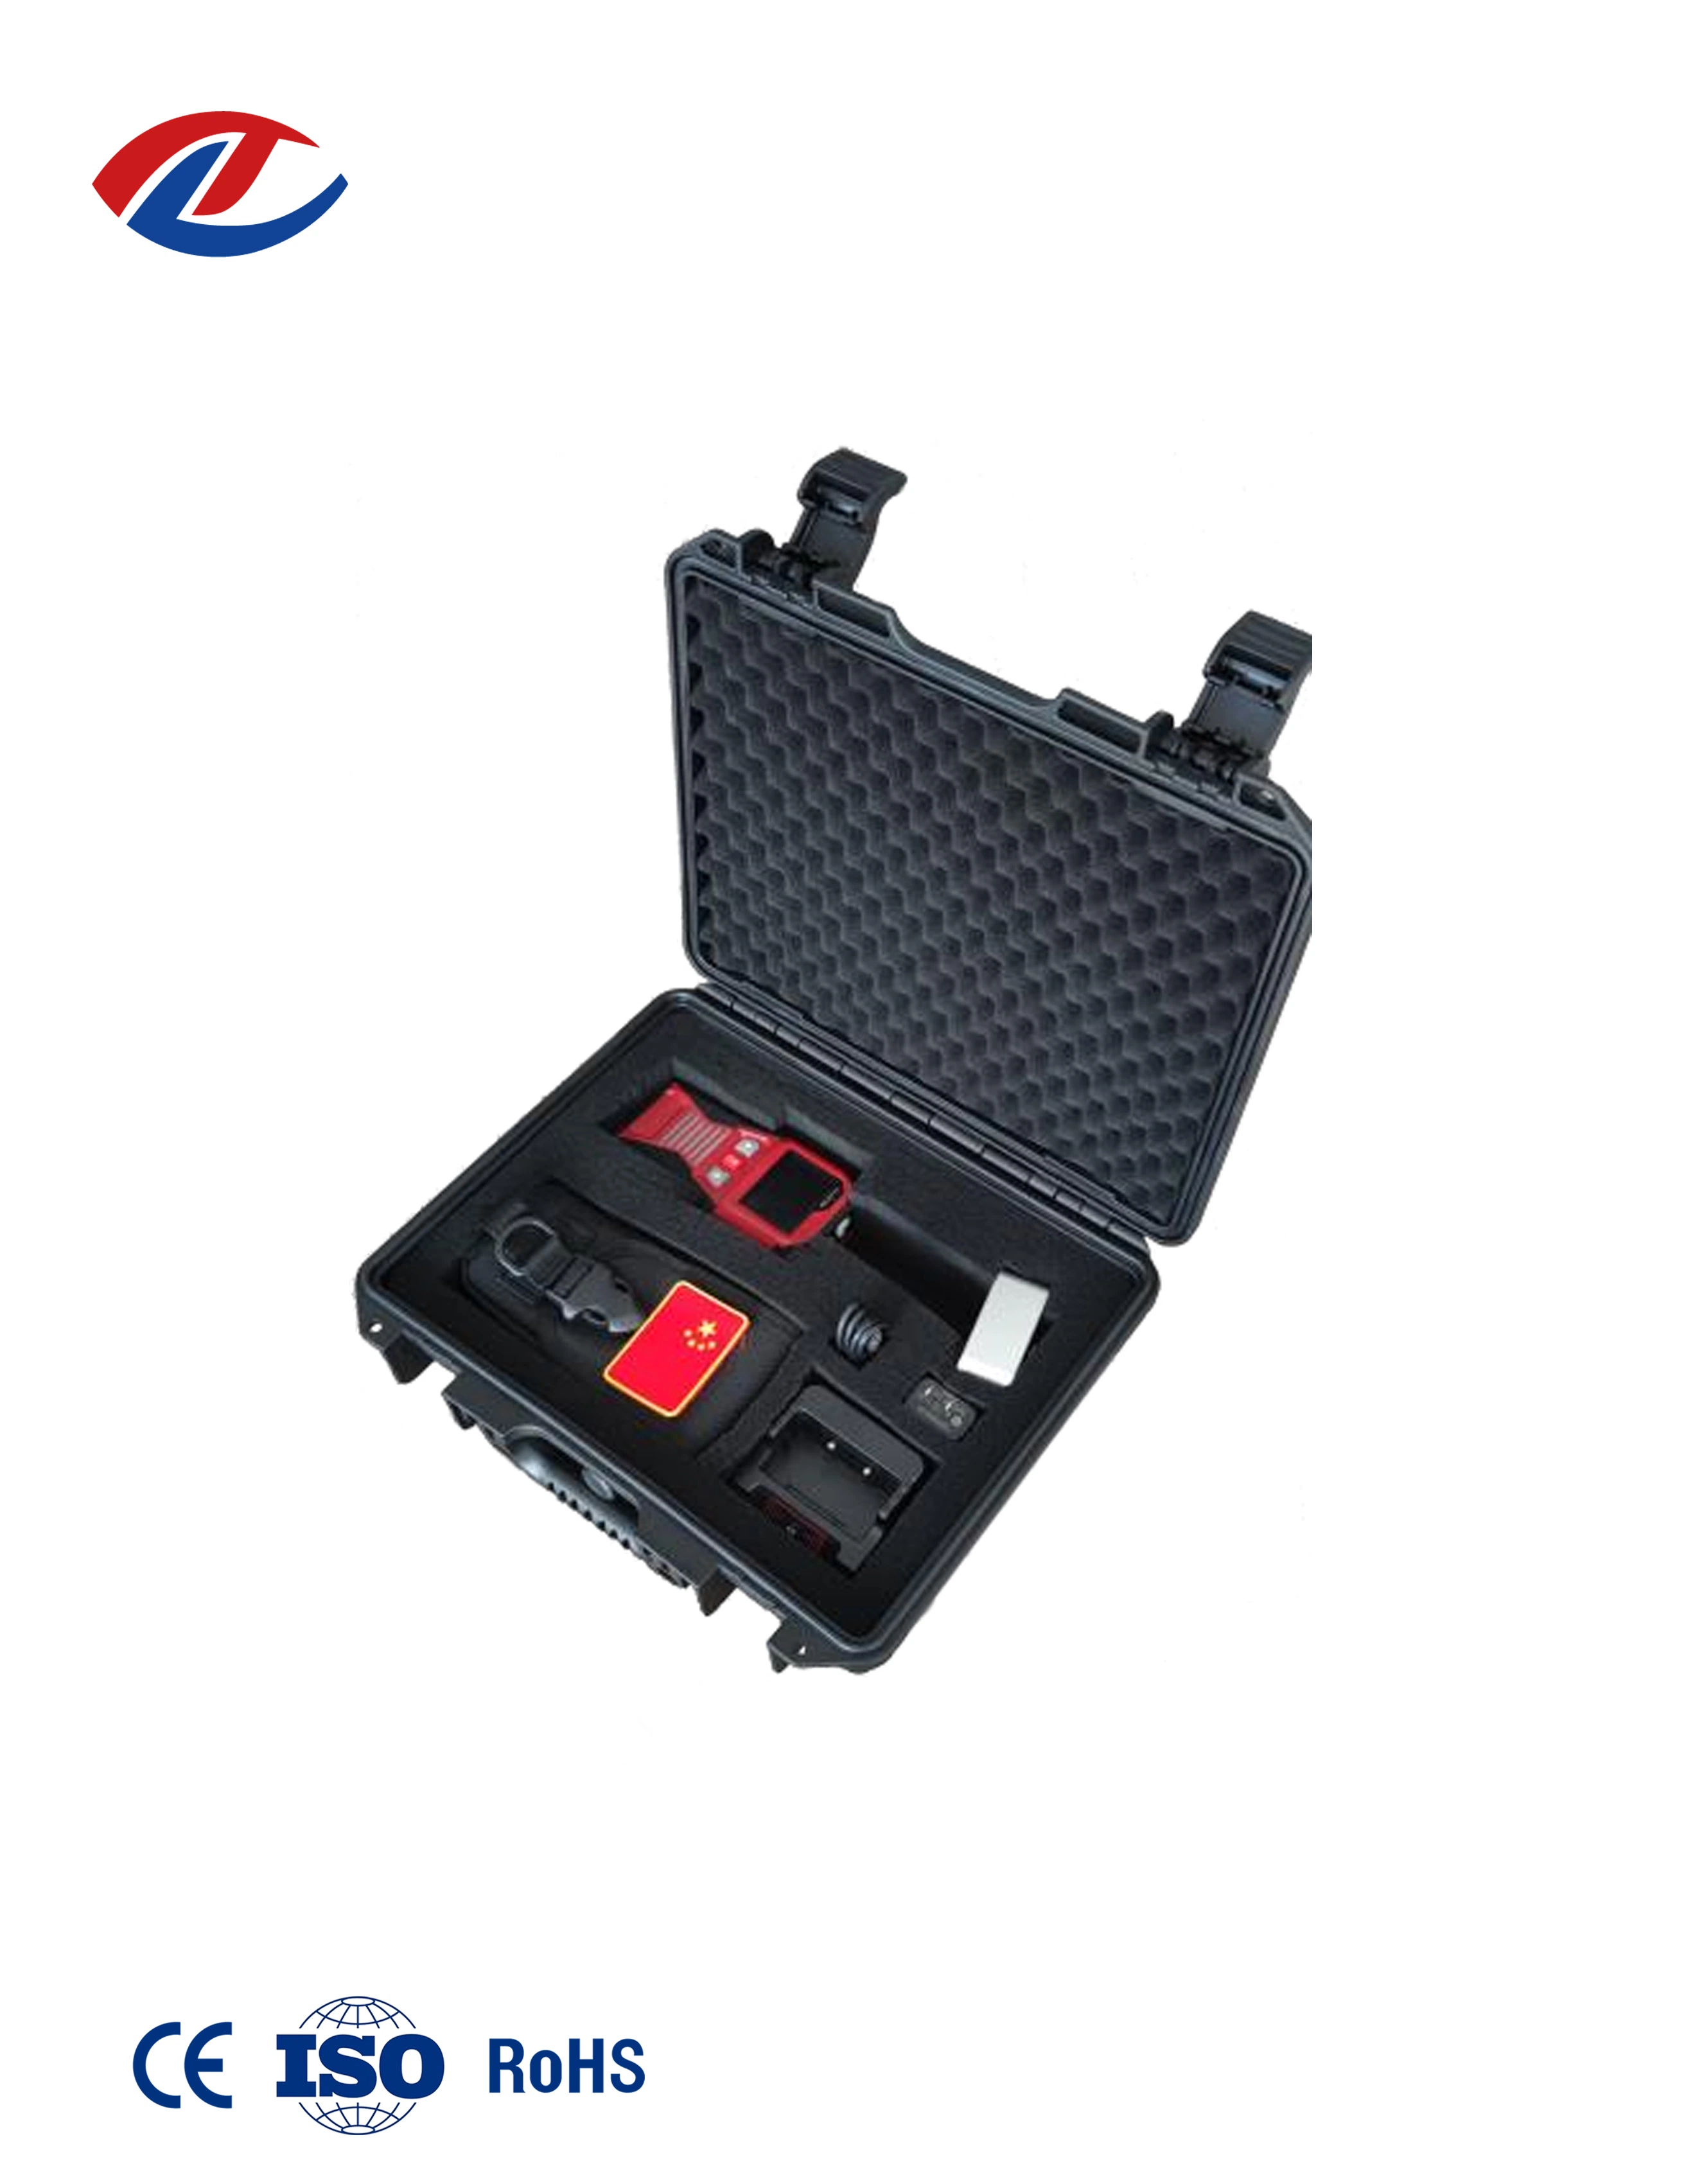 Timelion Portable Methane Gas Detector for Field Inspections RoHS